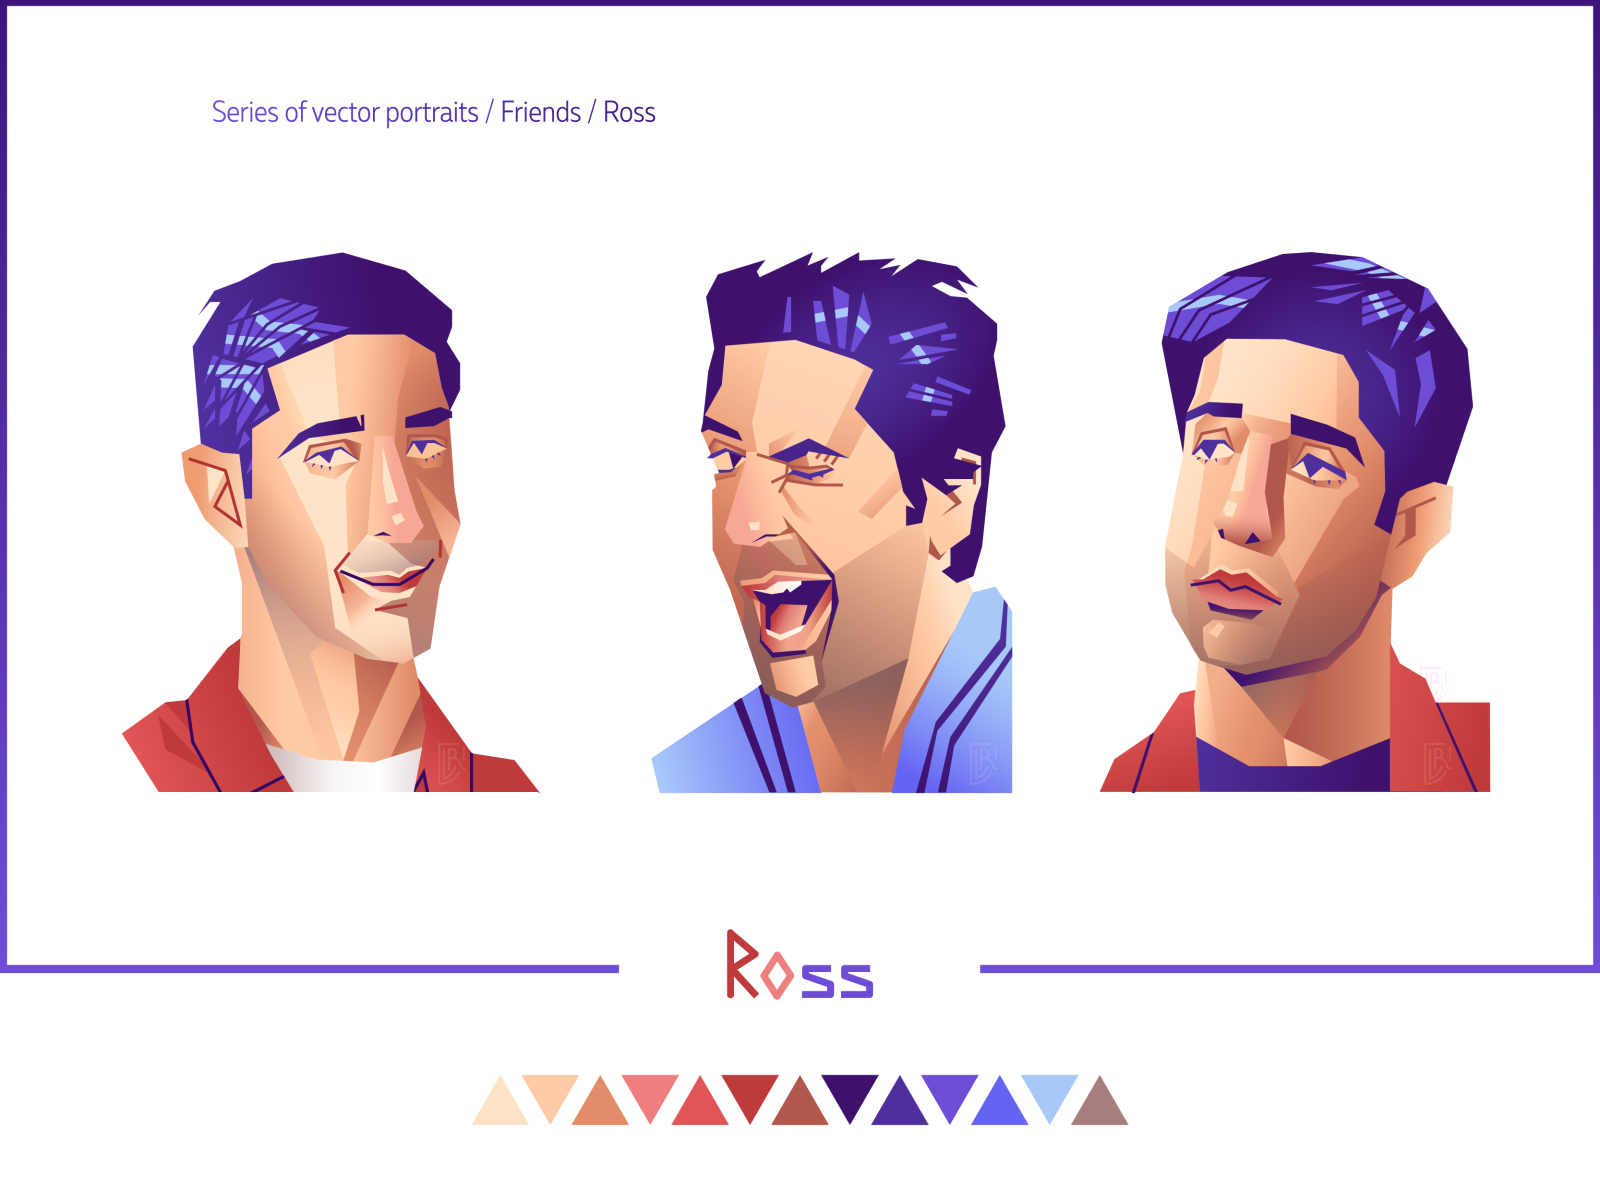 "Friends. Ross" by D_V_R on Dribbble